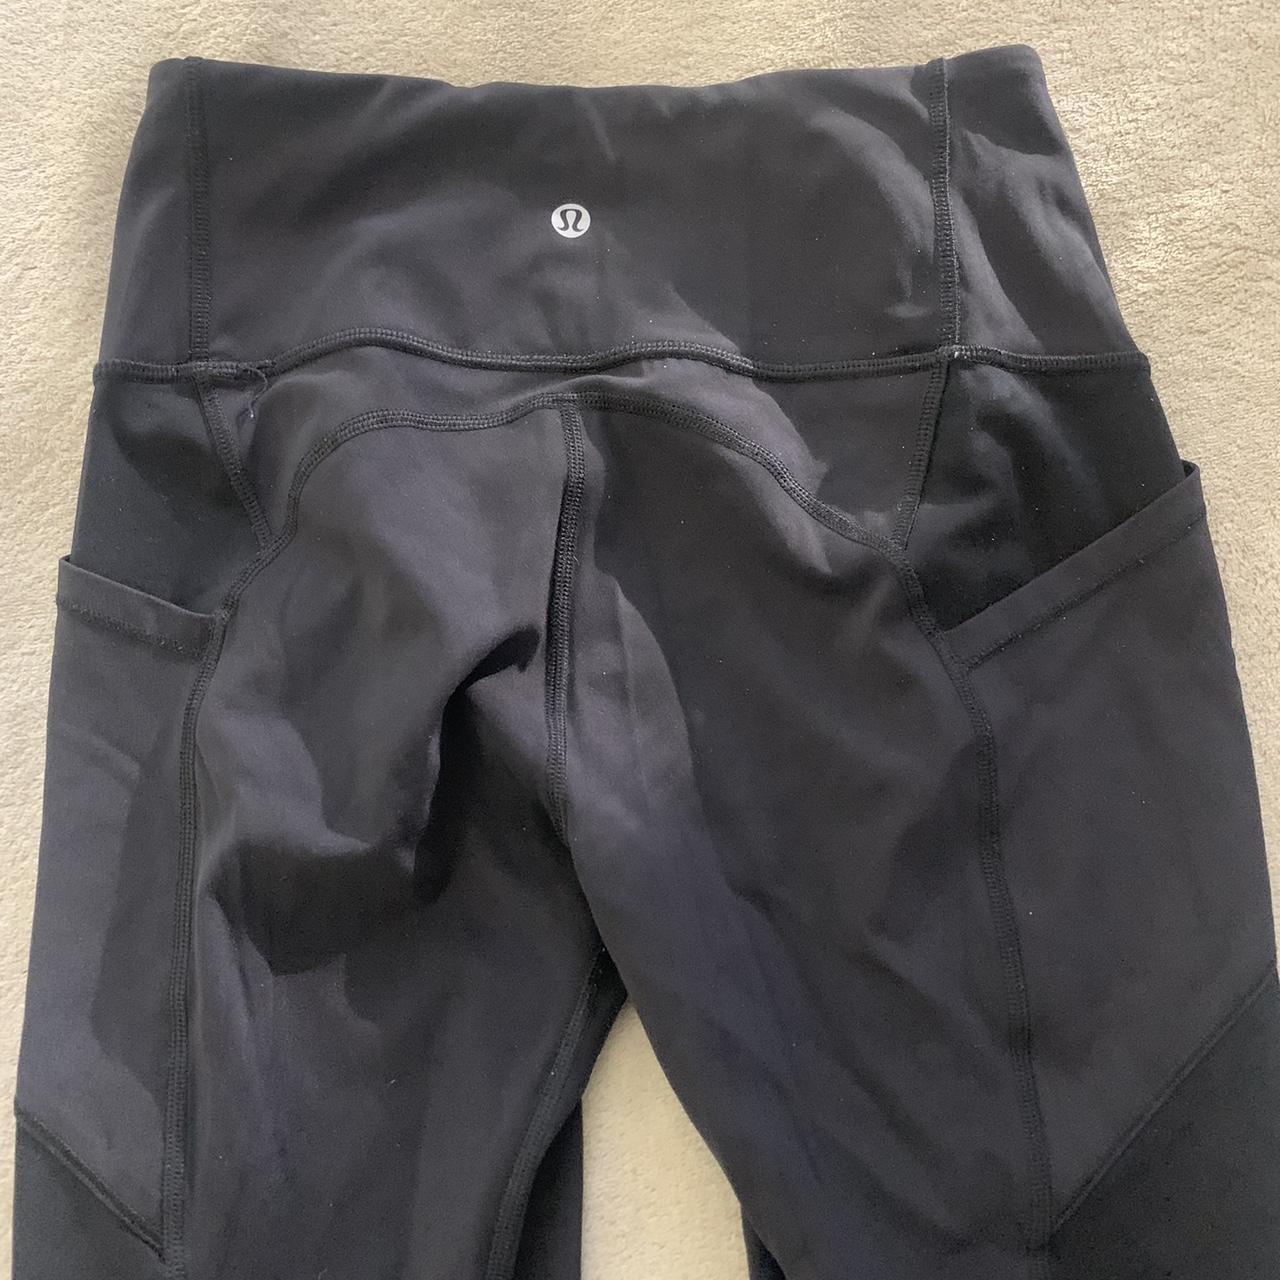 Lululemon All The Right Places Pant High Waisted... - Depop